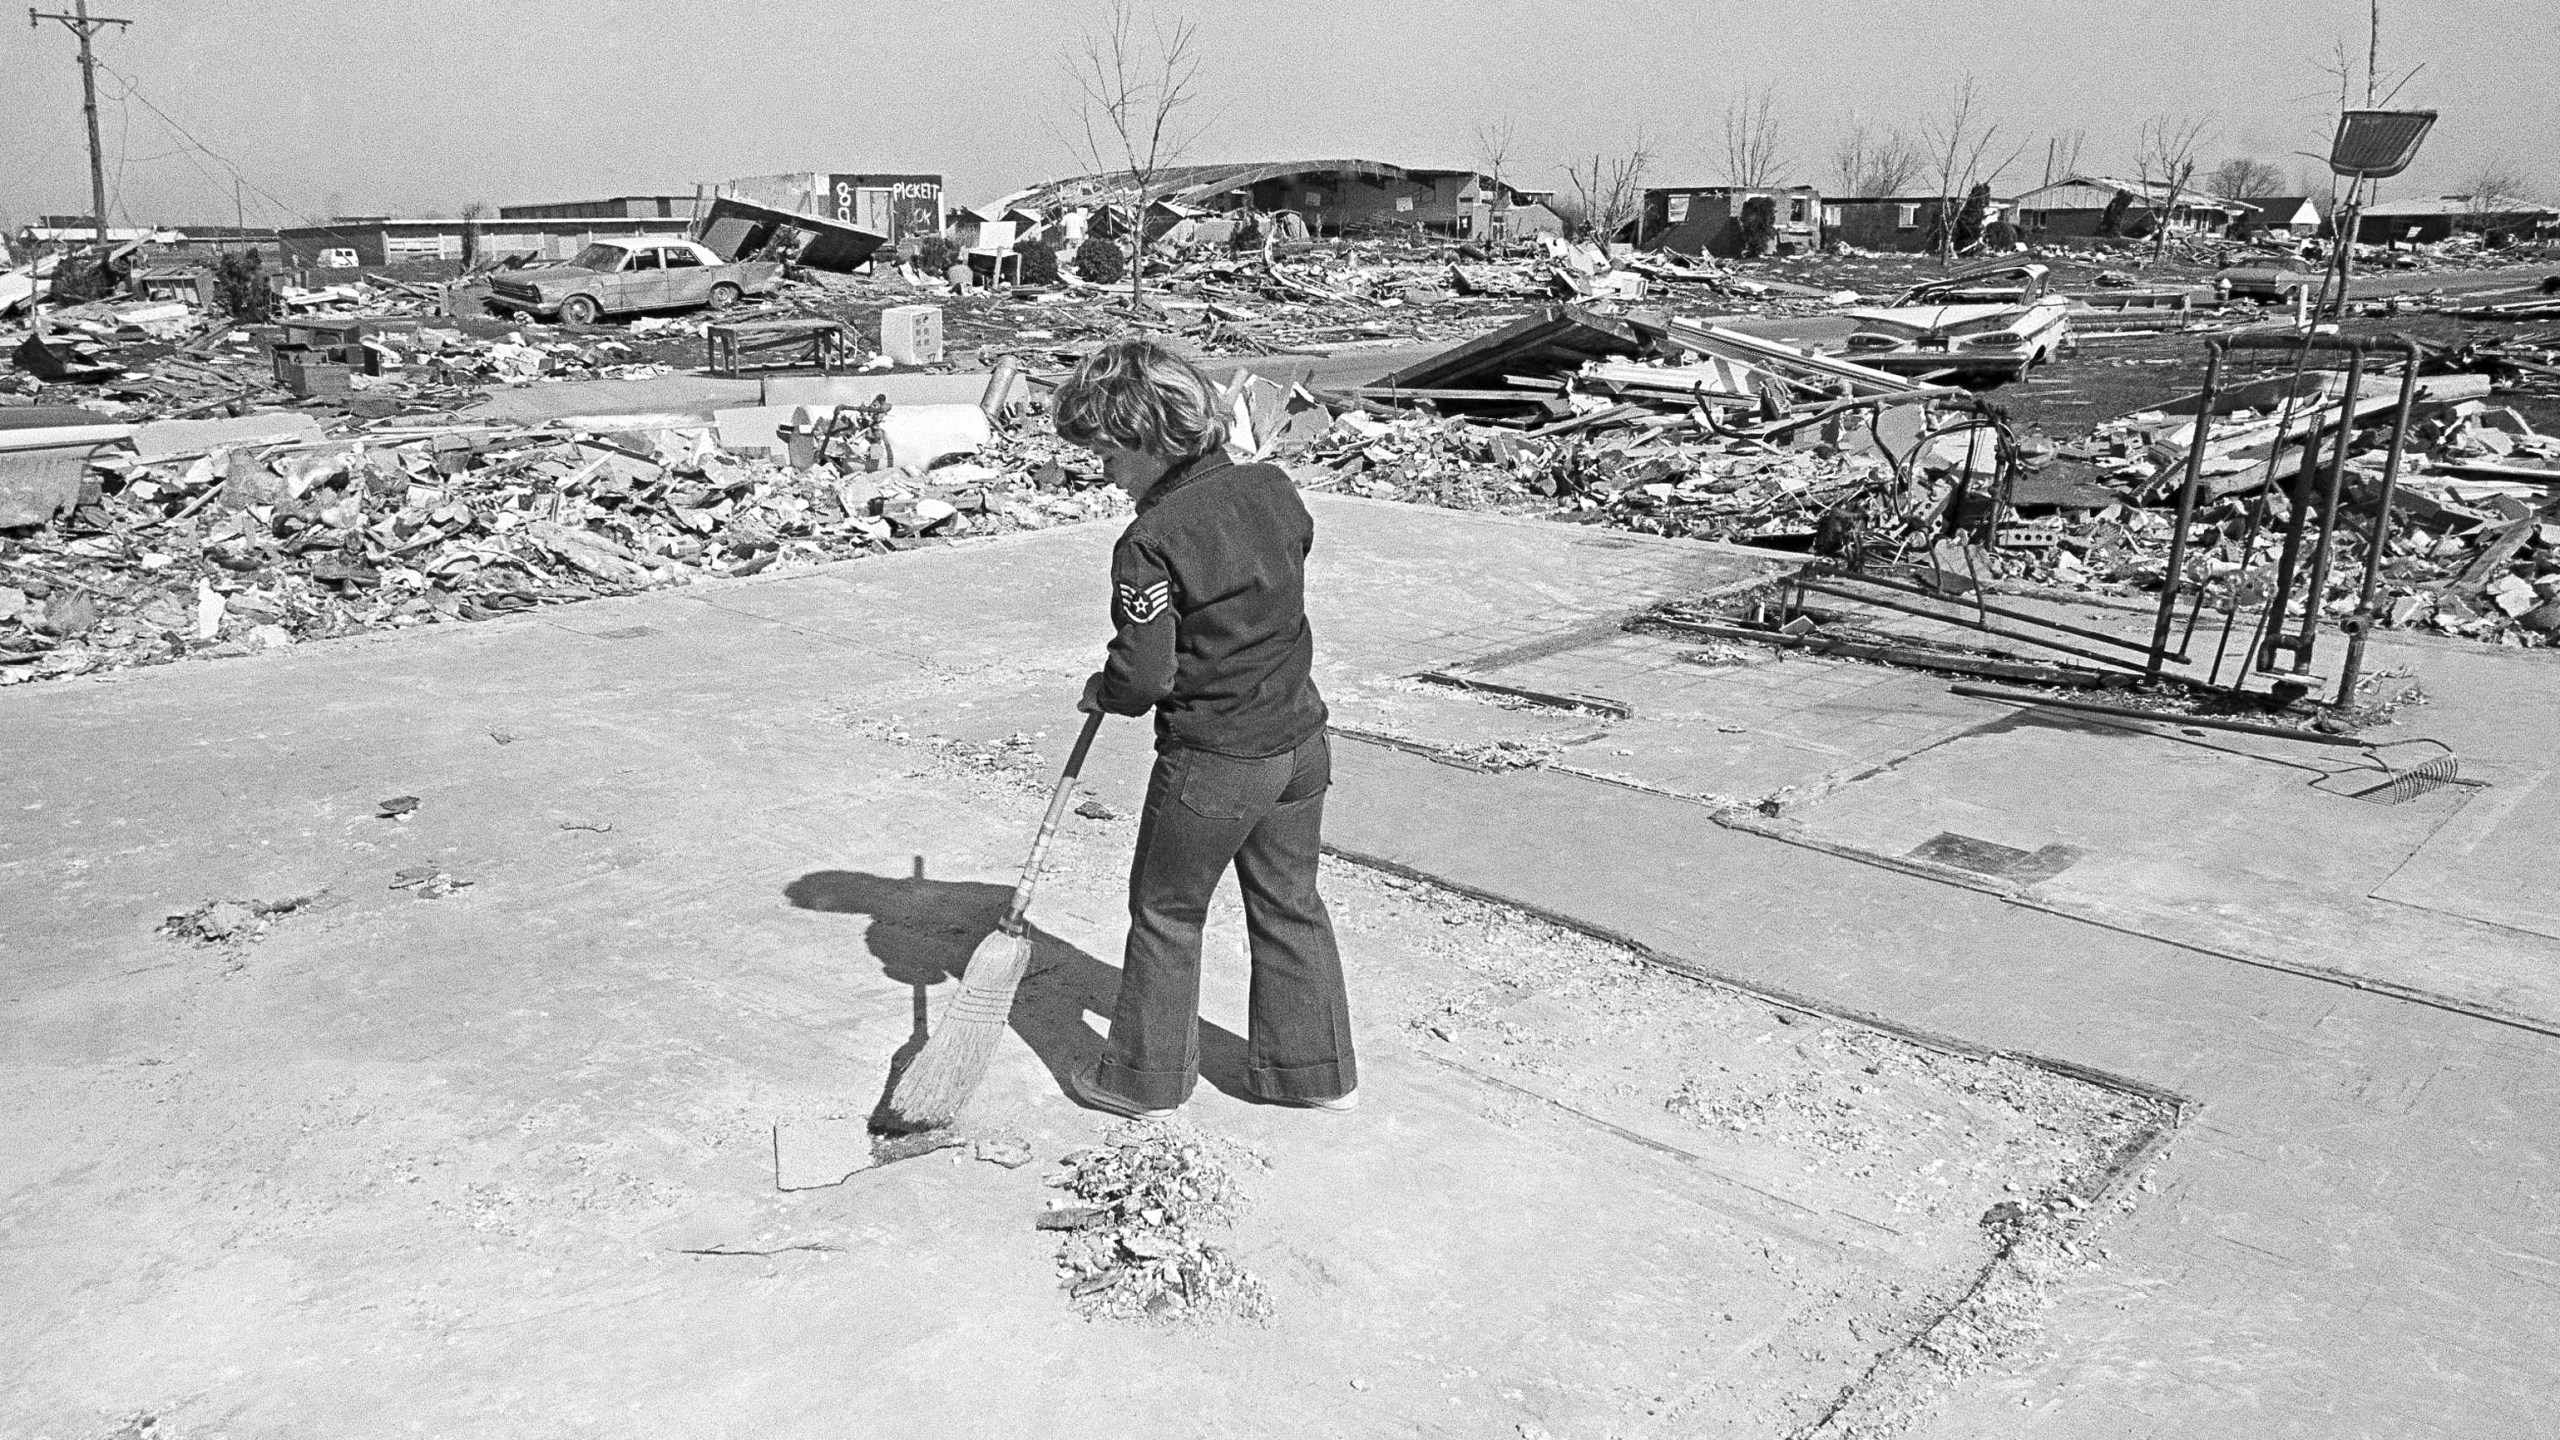 FILE - Mike Muney, 7, sweeps off the slab of a neighbor's house that was demolished by the early April 1974 storm in Xenia, Ohio, April 19, 1974. The deadly tornado killed 32 people, injured hundreds and leveled half the city of 25,000. Nearby Wilberforce was also hit hard. As the Watergate scandal unfolded in Washington, President Richard Nixon made an unannounced visit to Xenia to tour the damage. Xenia's was the deadliest and most powerful tornado of the 1974 Super Outbreak. (AP Photo, file)